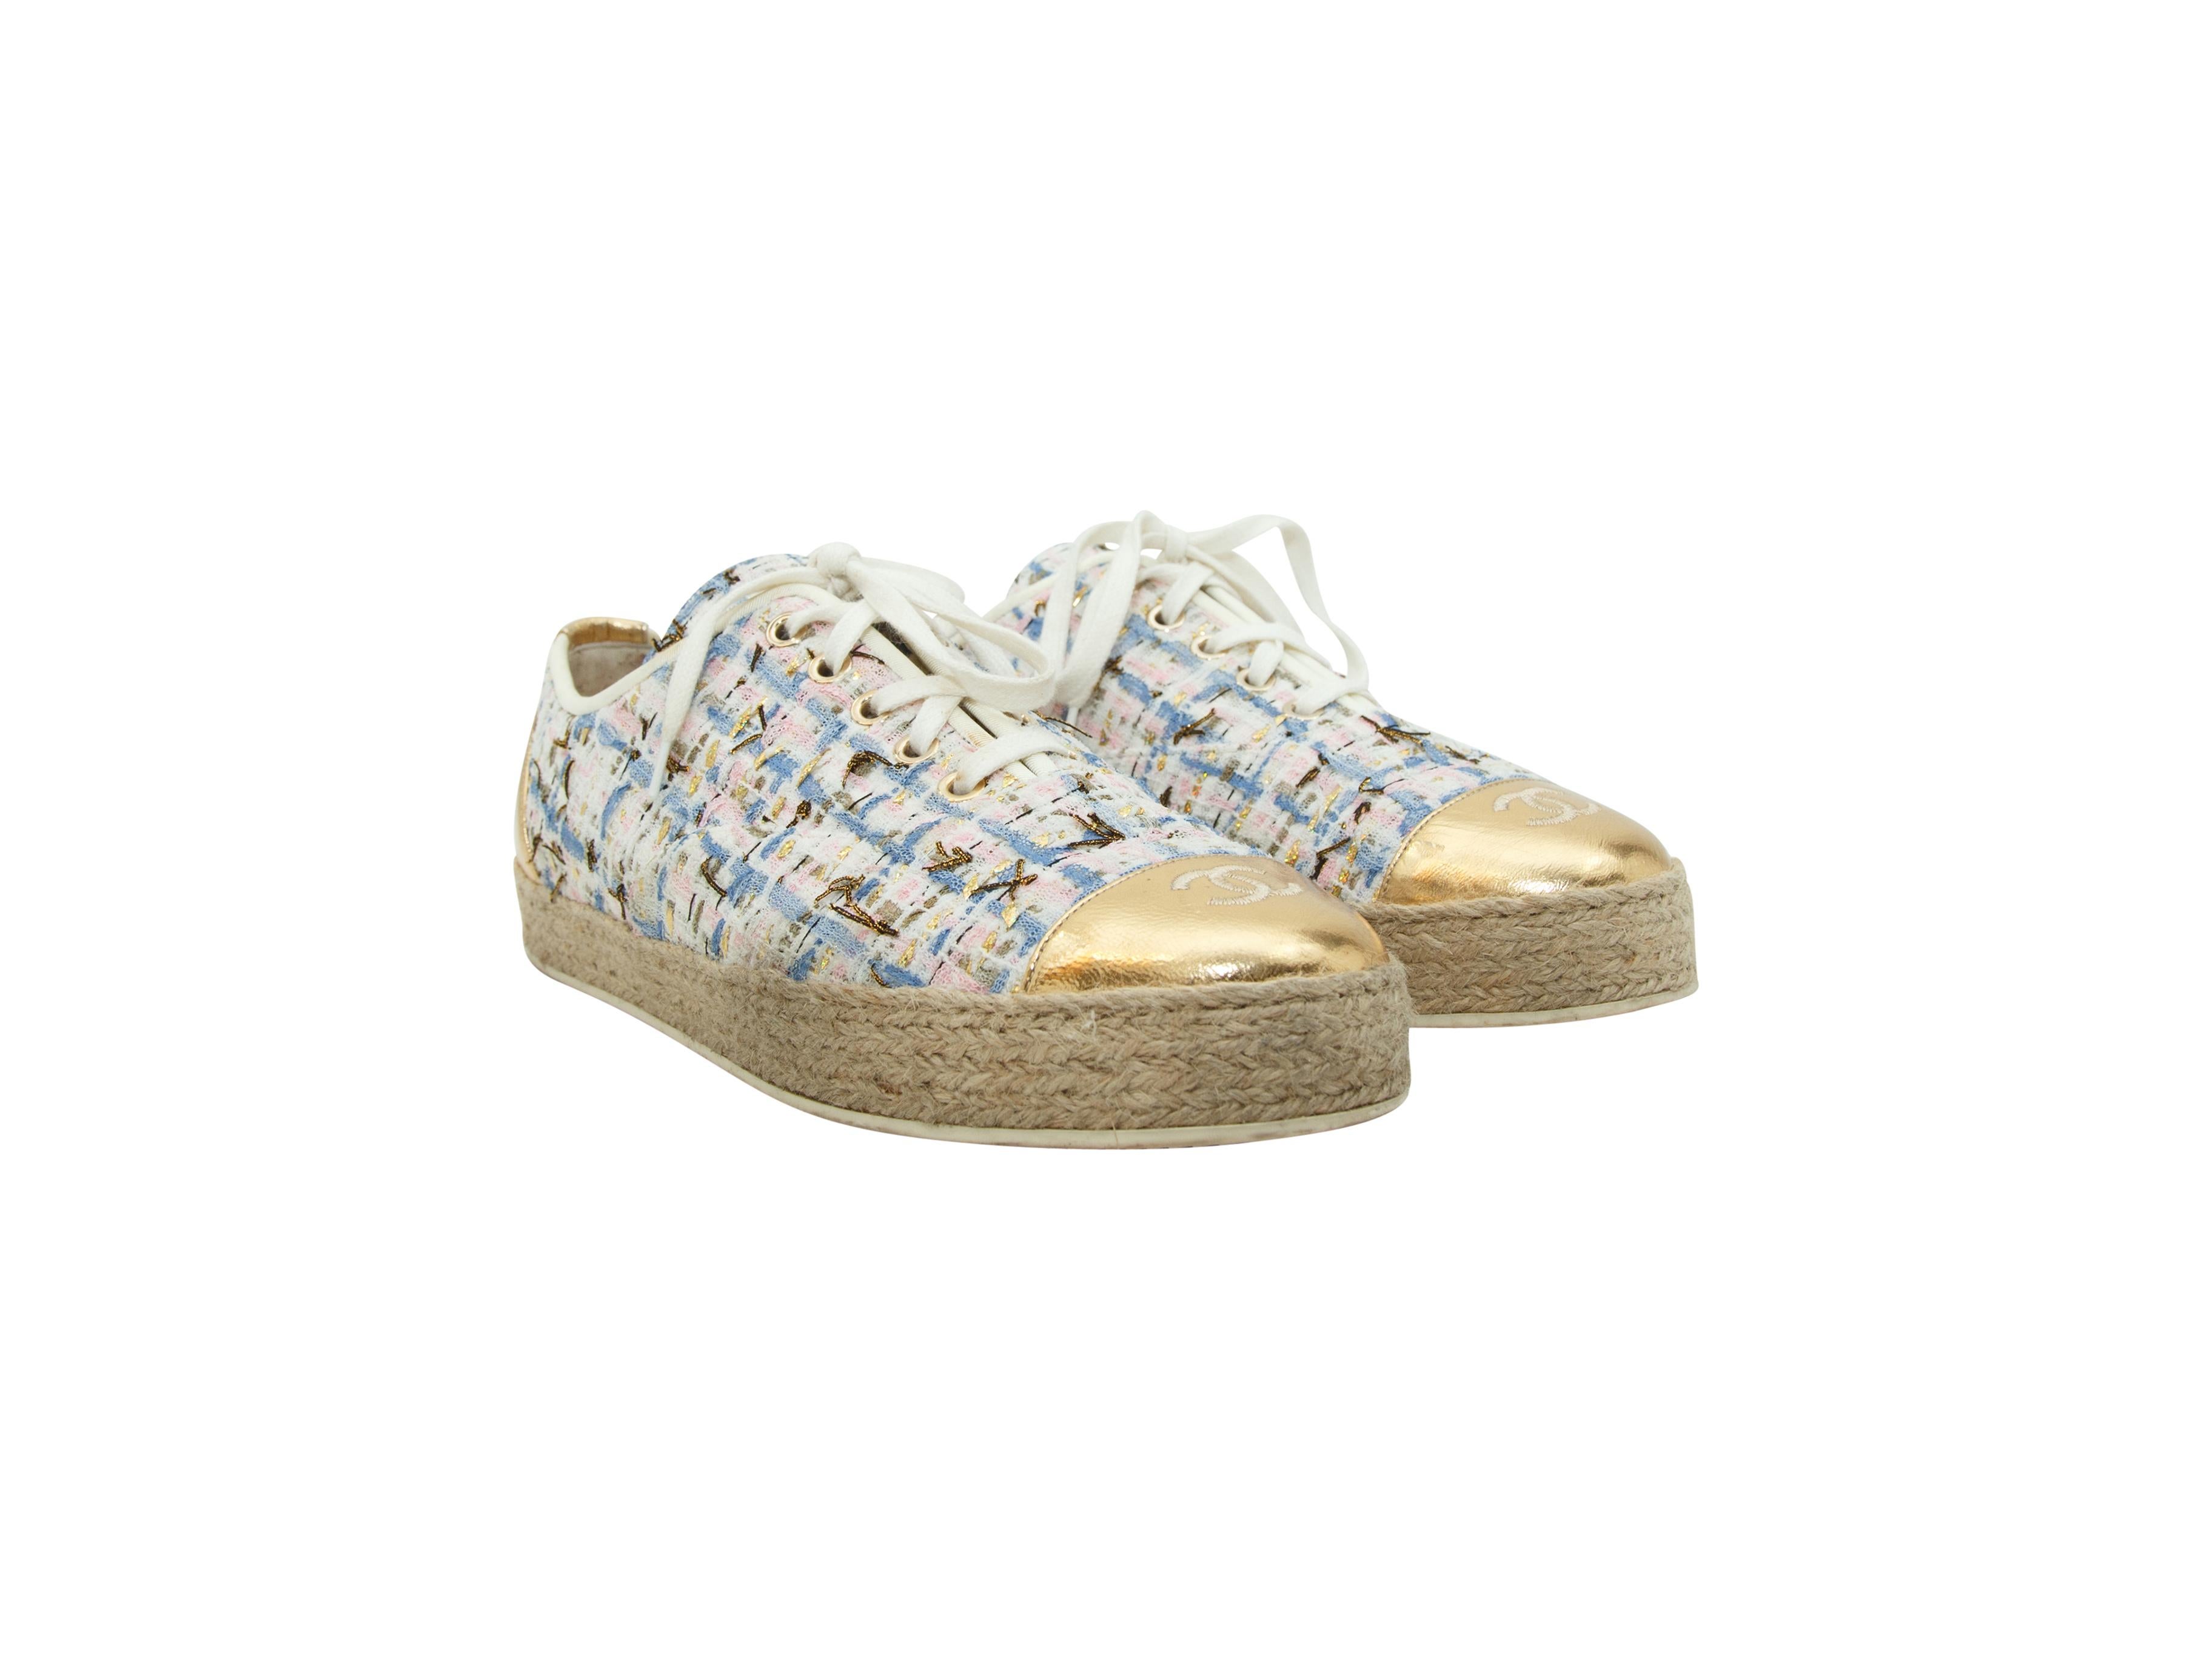 Product details:  Multicolor tweed espadrille flats by Chanel.  Trimmed with metallic gold leather.  Lace-up closure.  Round cap toe with logo detail.  1